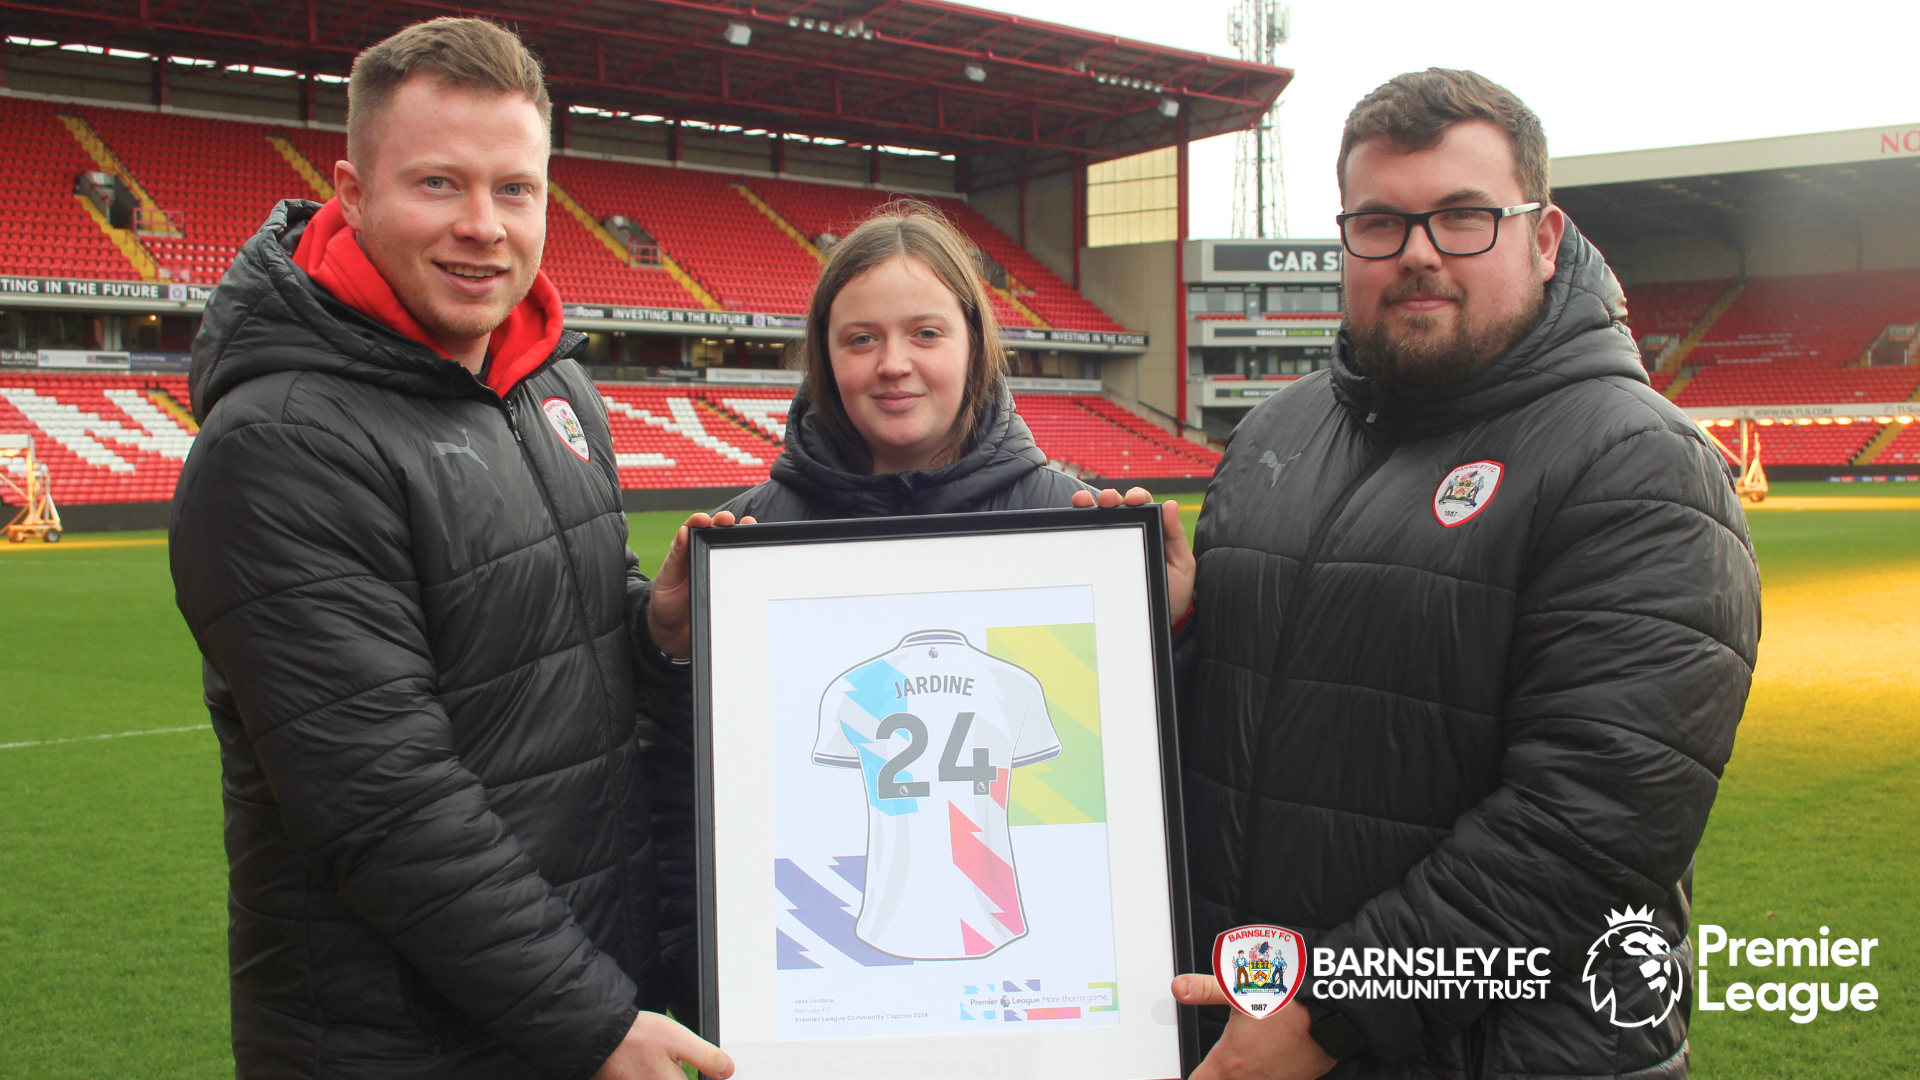 Barnsley FC Community Trust name Premier League Community Captain as part of ‘More than a game campaign’ 